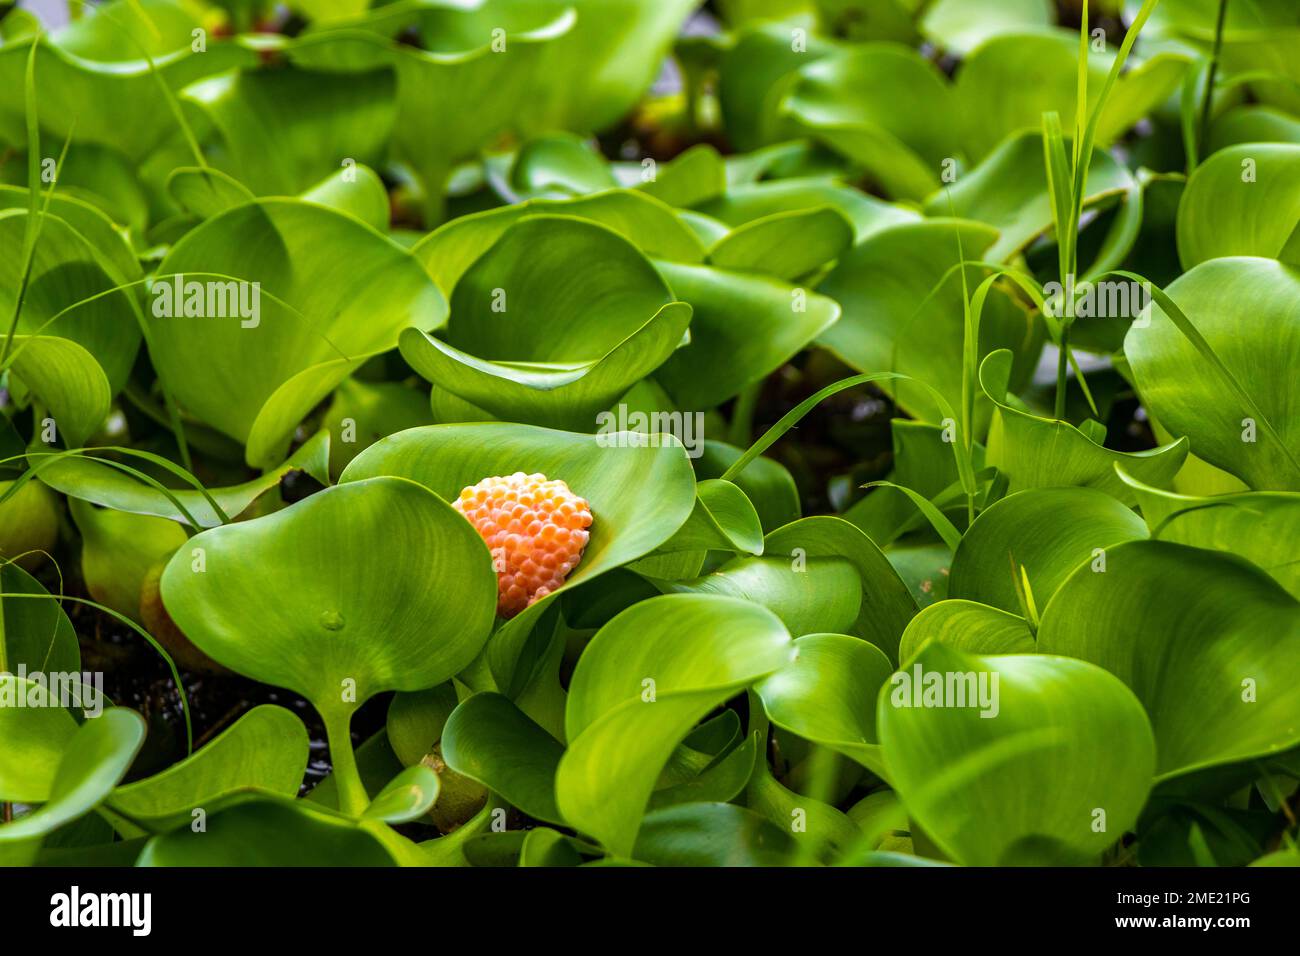 Green lake and marsh plants in the Sabana Park San Jose Costa Rica in Central America. Stock Photo